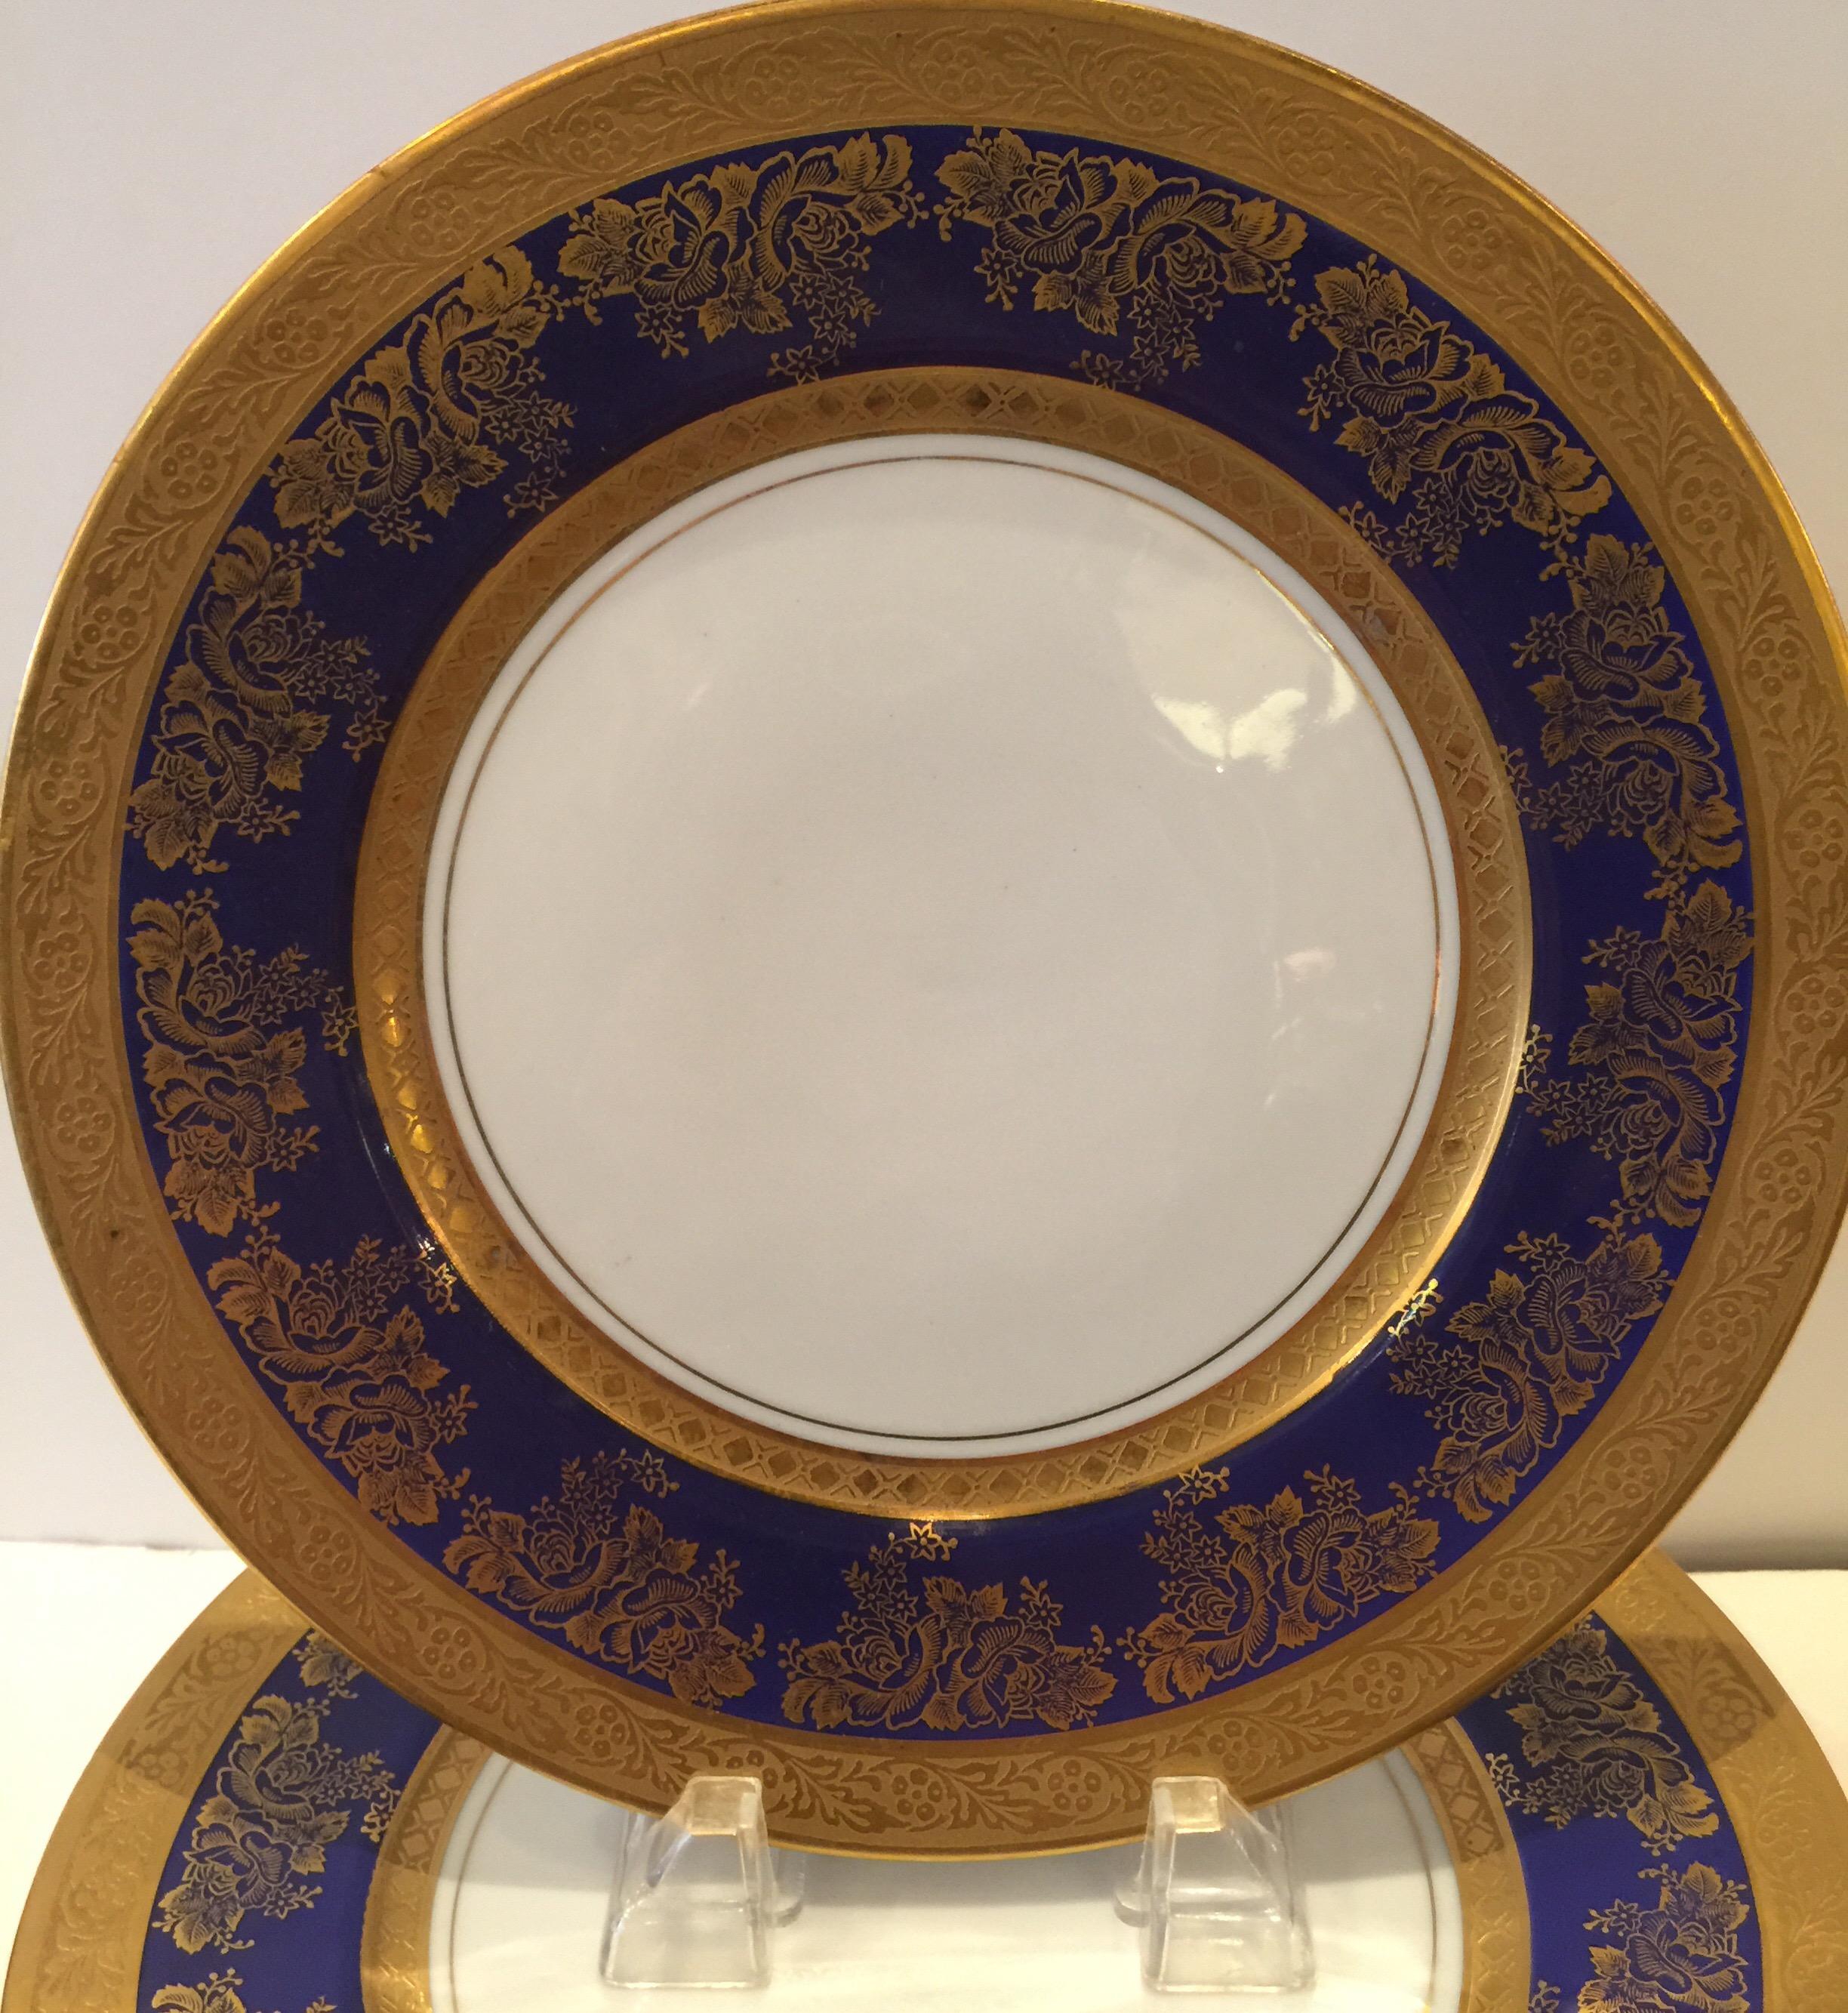 Set of eight gold and cobalt blue service/dinner plates Royal Doulton, circa 1900-1920
Dimensions: 11 inches.